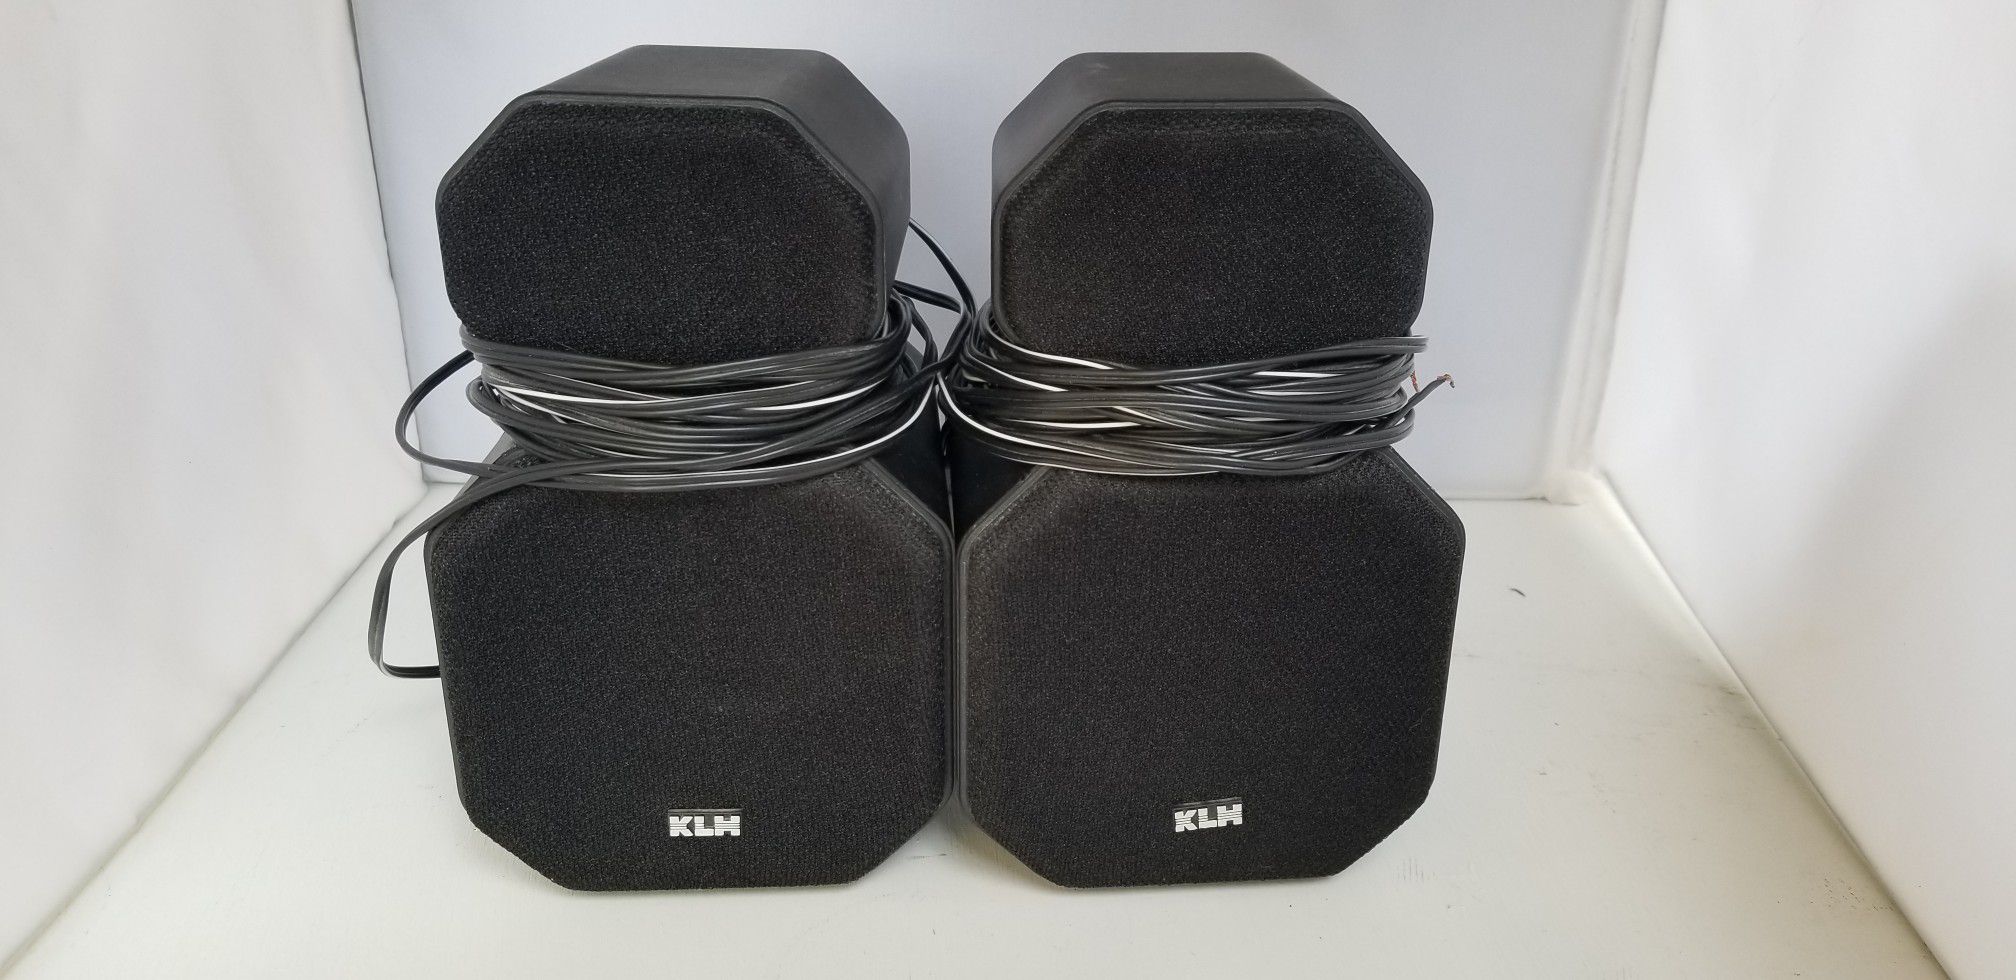 KLH Model 8S Audio System Speakers Shielded for Video Lot of 2 Twistable